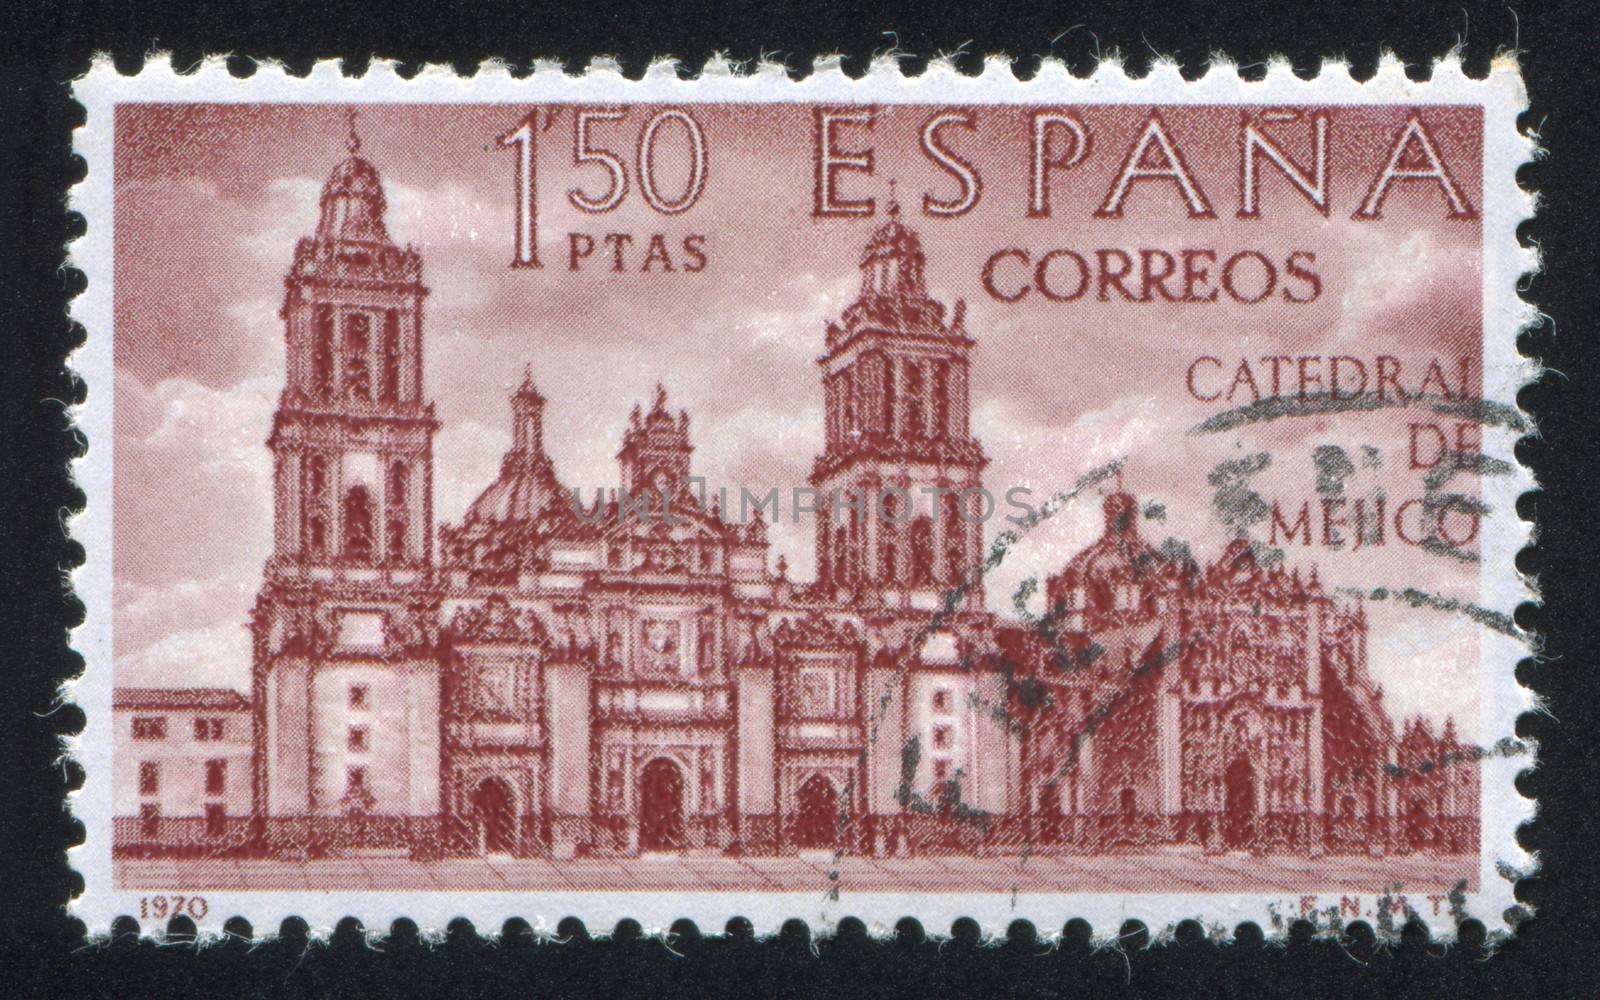 SPAIN - CIRCA 1970: stamp printed by Spain, shows Mexico Cathedral, circa 1970